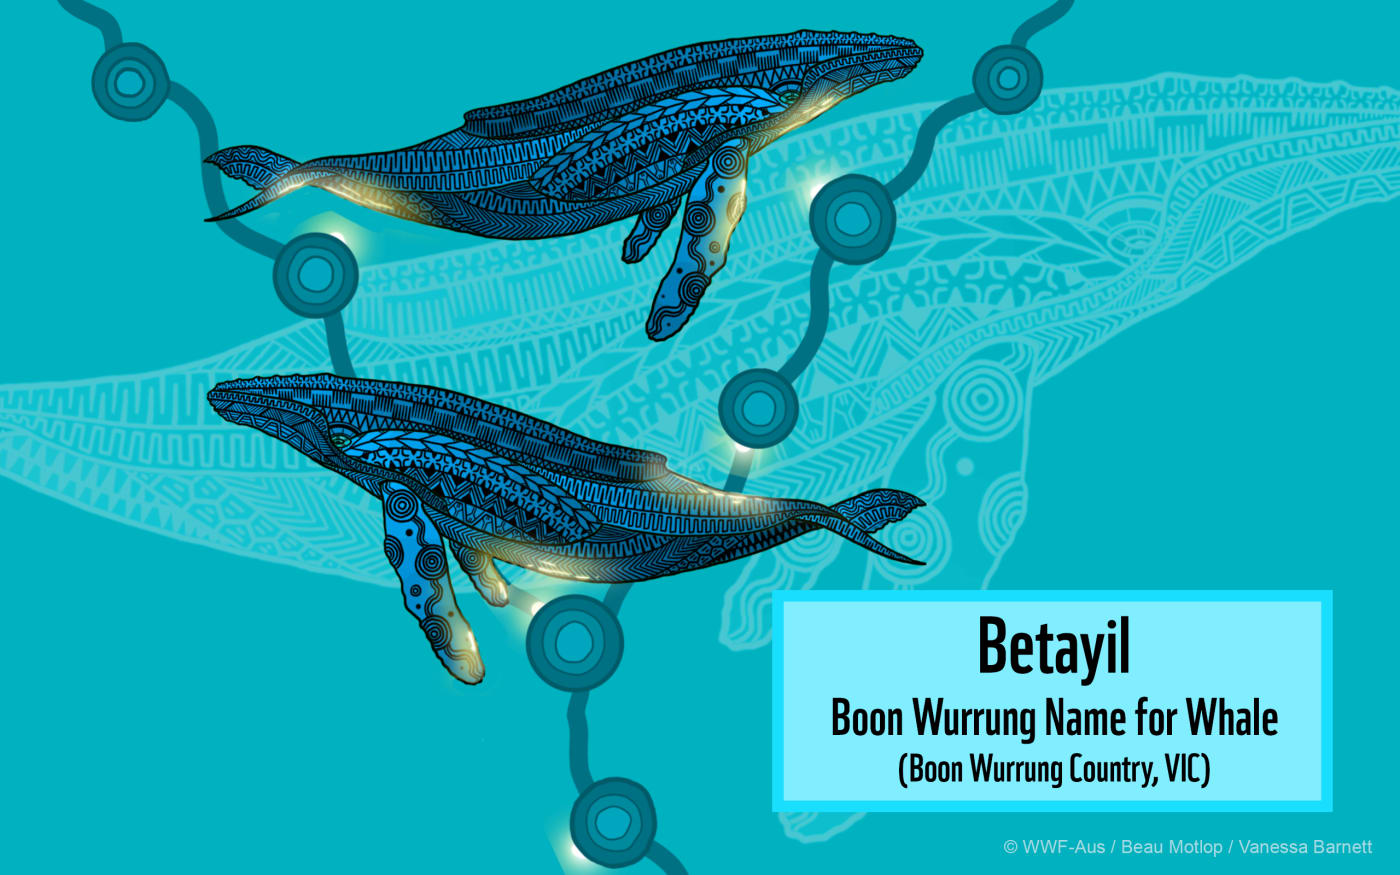 Indigenous Whale or Betayil  Art Desktop featuring Boon Wurrung Name for Whale (2560x1600)